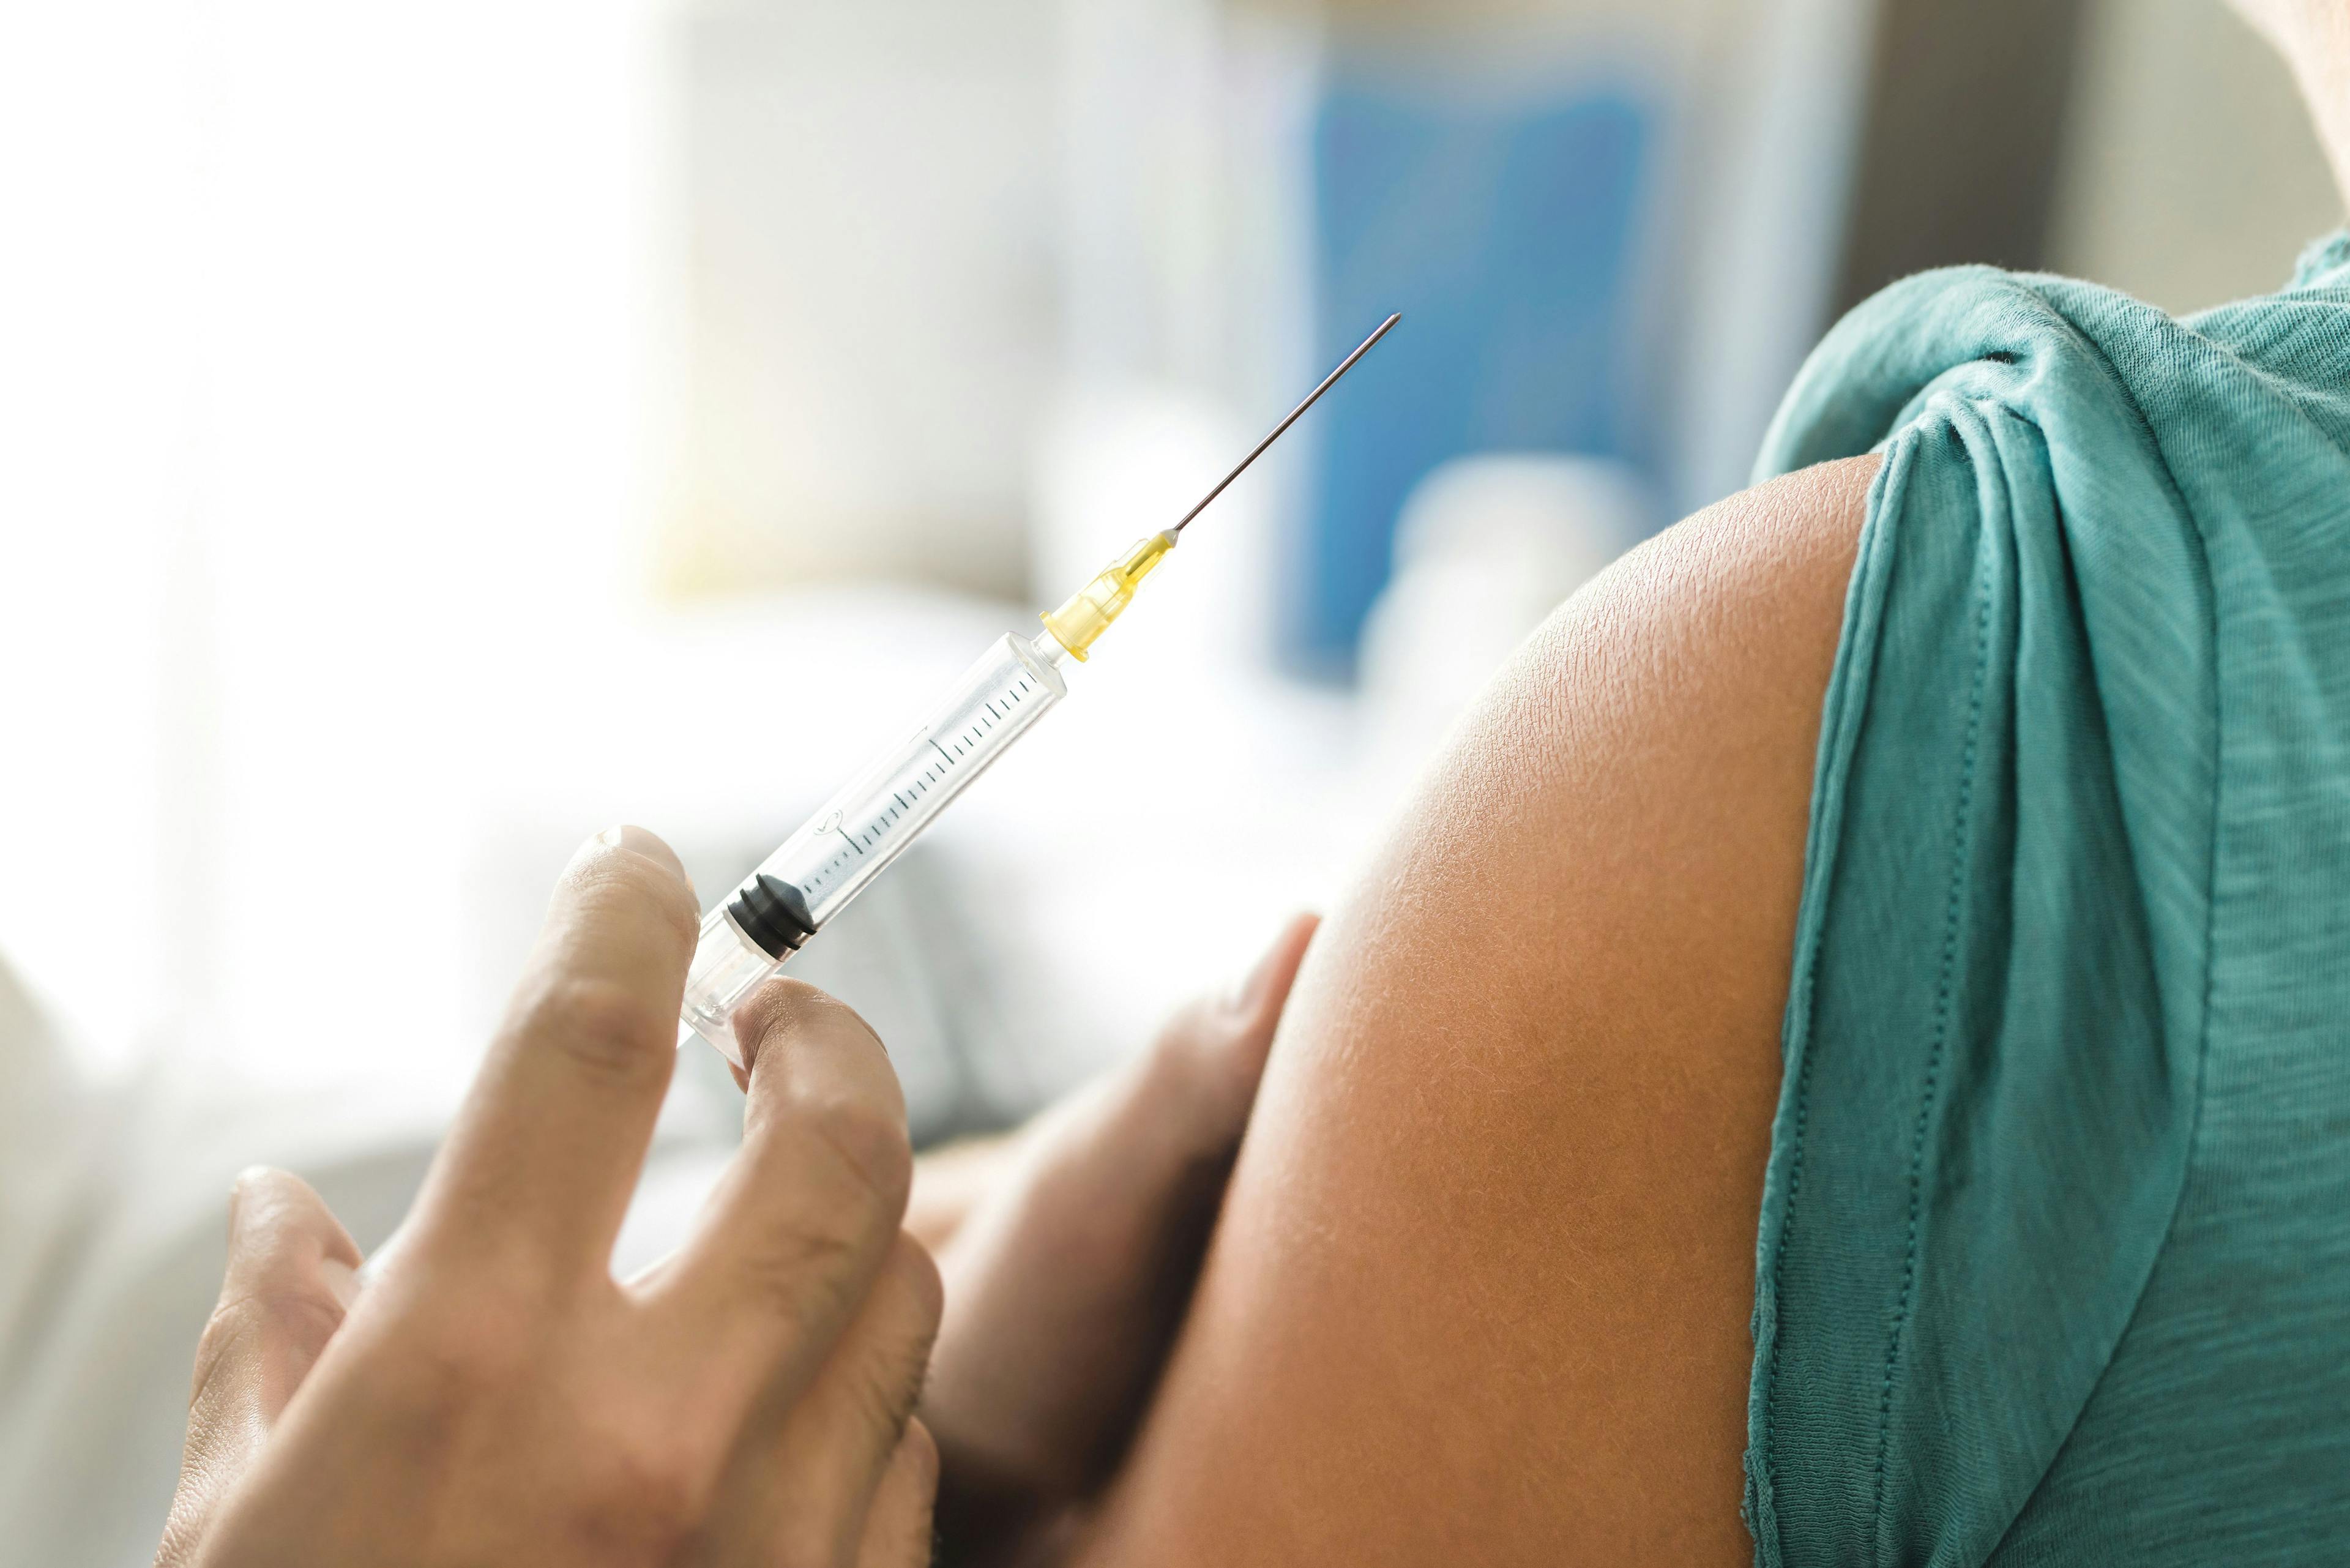 Maternal influenza vaccination during pregnancy protects infants